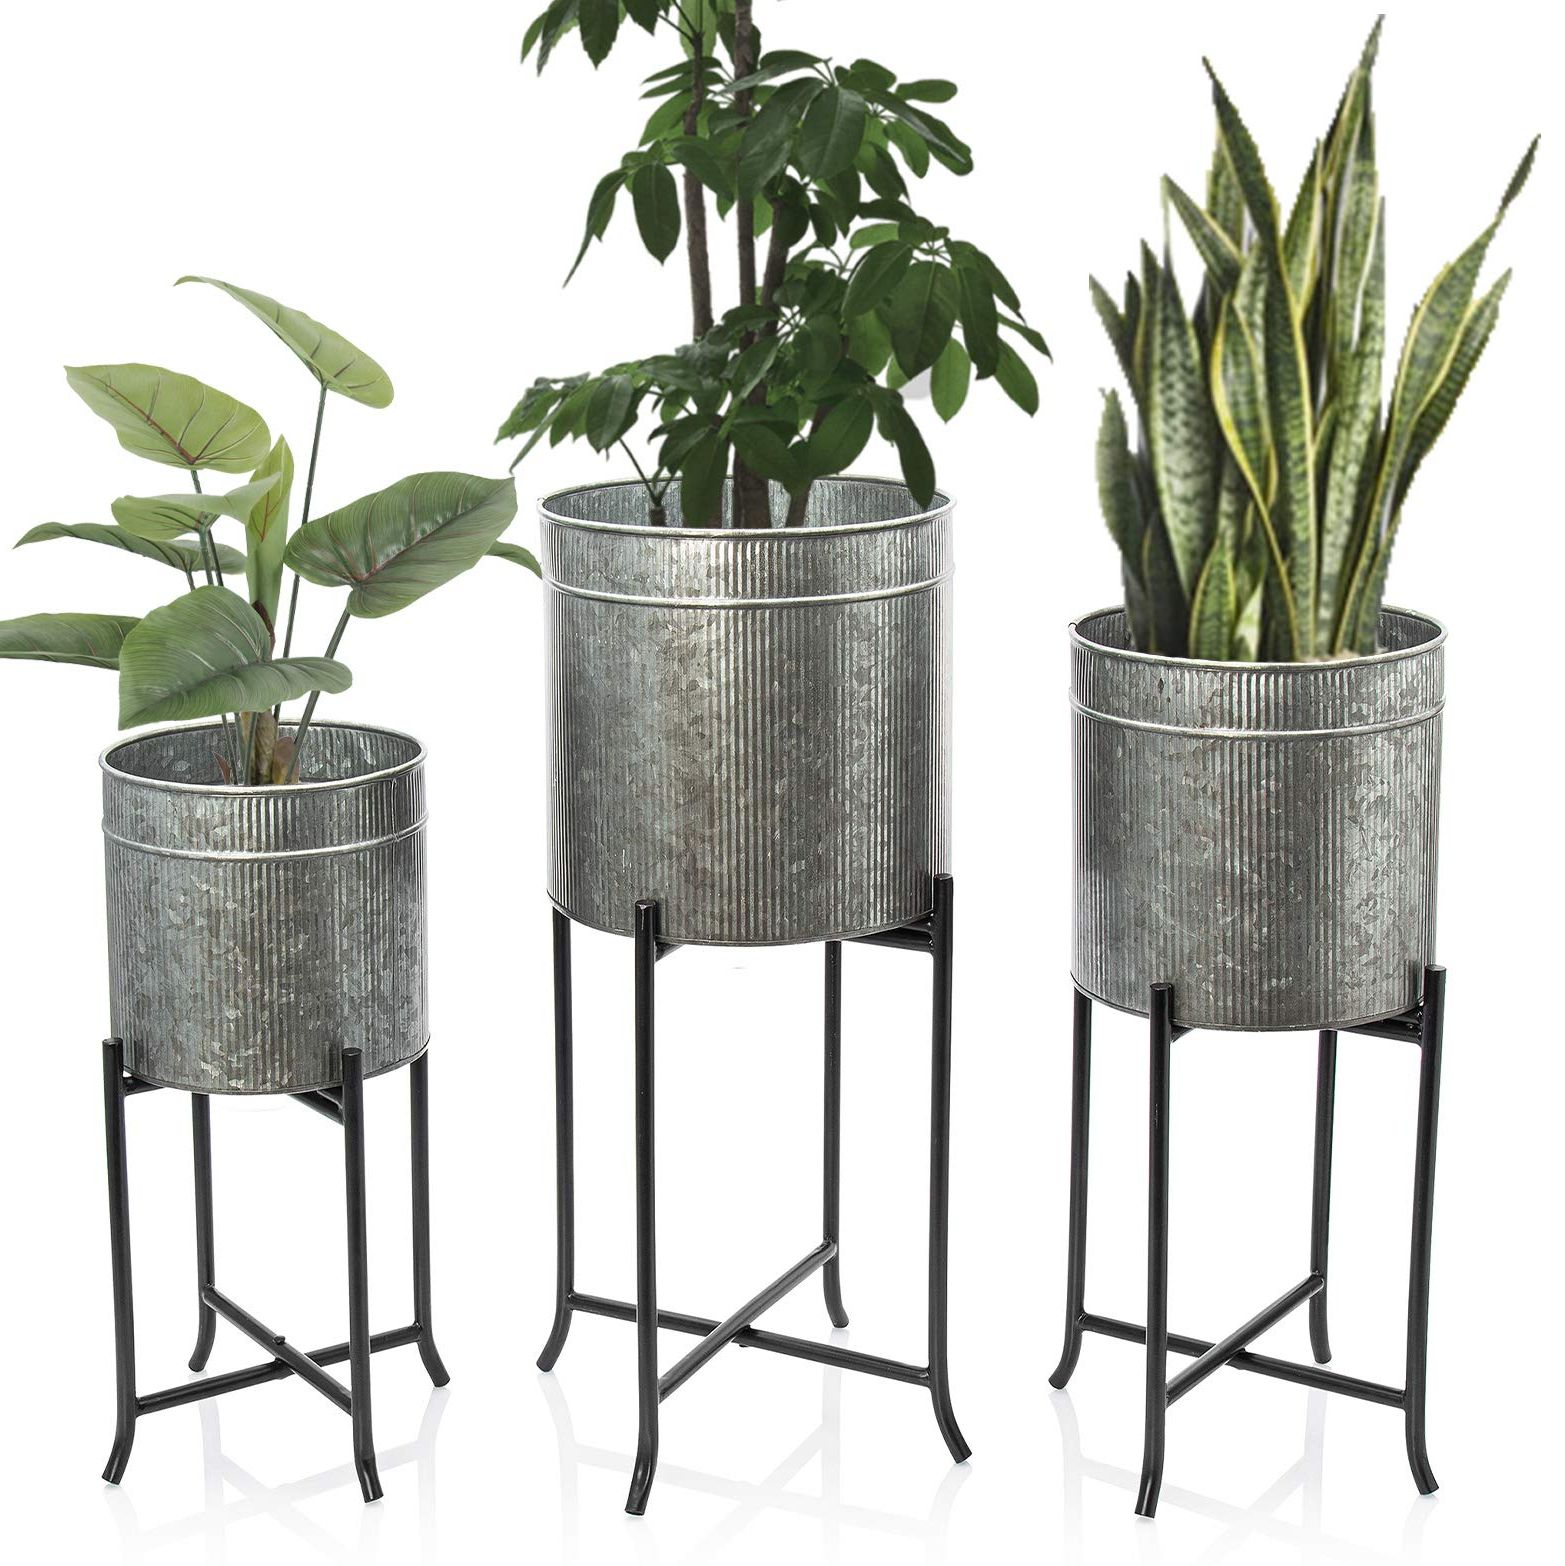 Set 3 Large Galvanized Planters Outdoor & Indoor, Metal Farmhouse Decor For  Garden, Patio, Porch & Balcony, Pots With Stand And Drainage, Front Door  Decorative Planting Container, Modern Rustic Decor With Recent Galvanized Plant Stands (View 9 of 10)